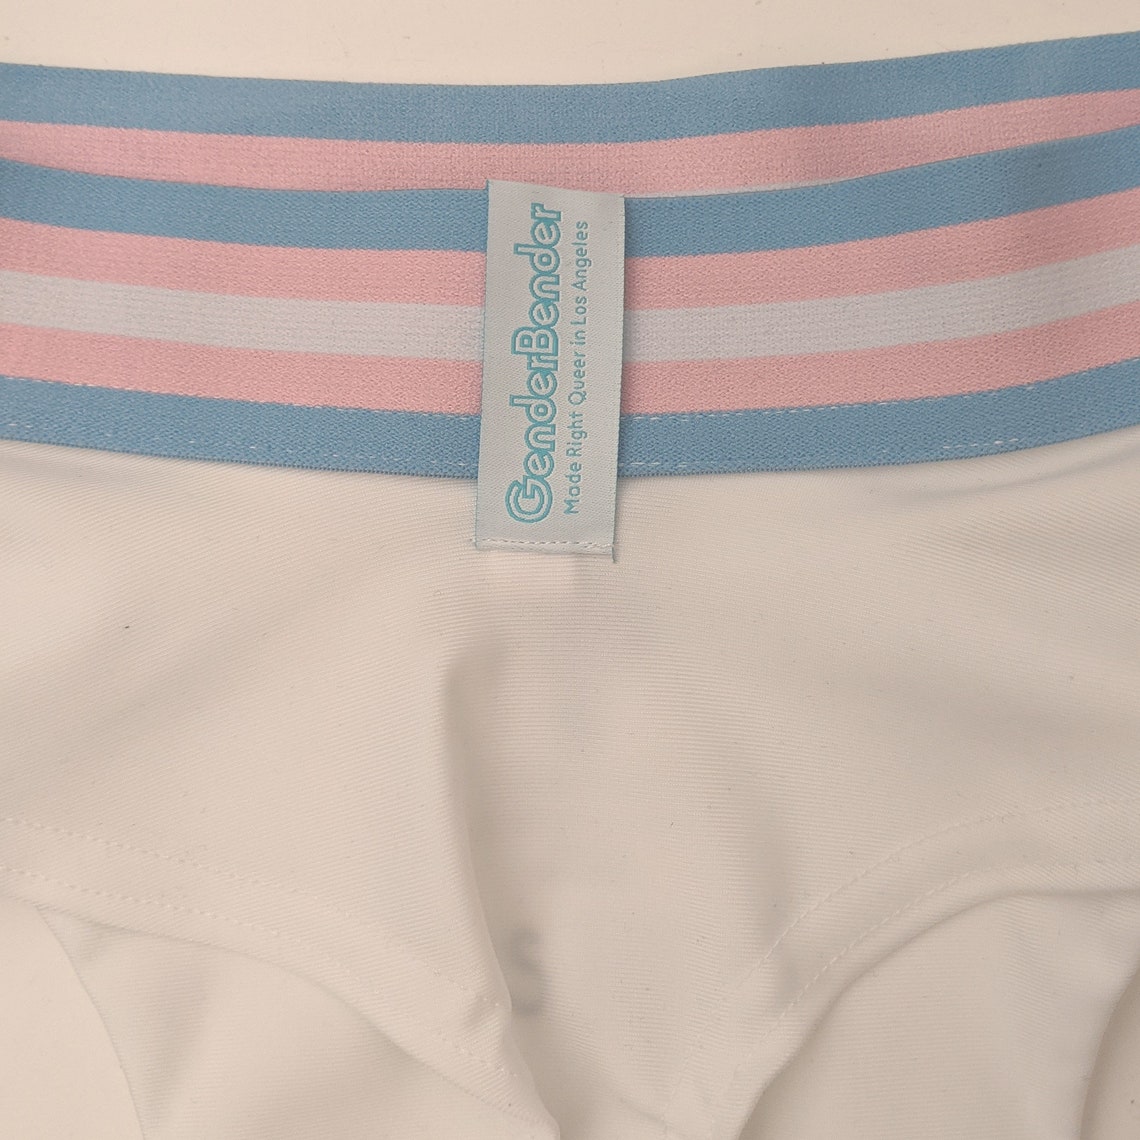 Trans Nonbinary Pride Gaff for Soft Tucking | Etsy